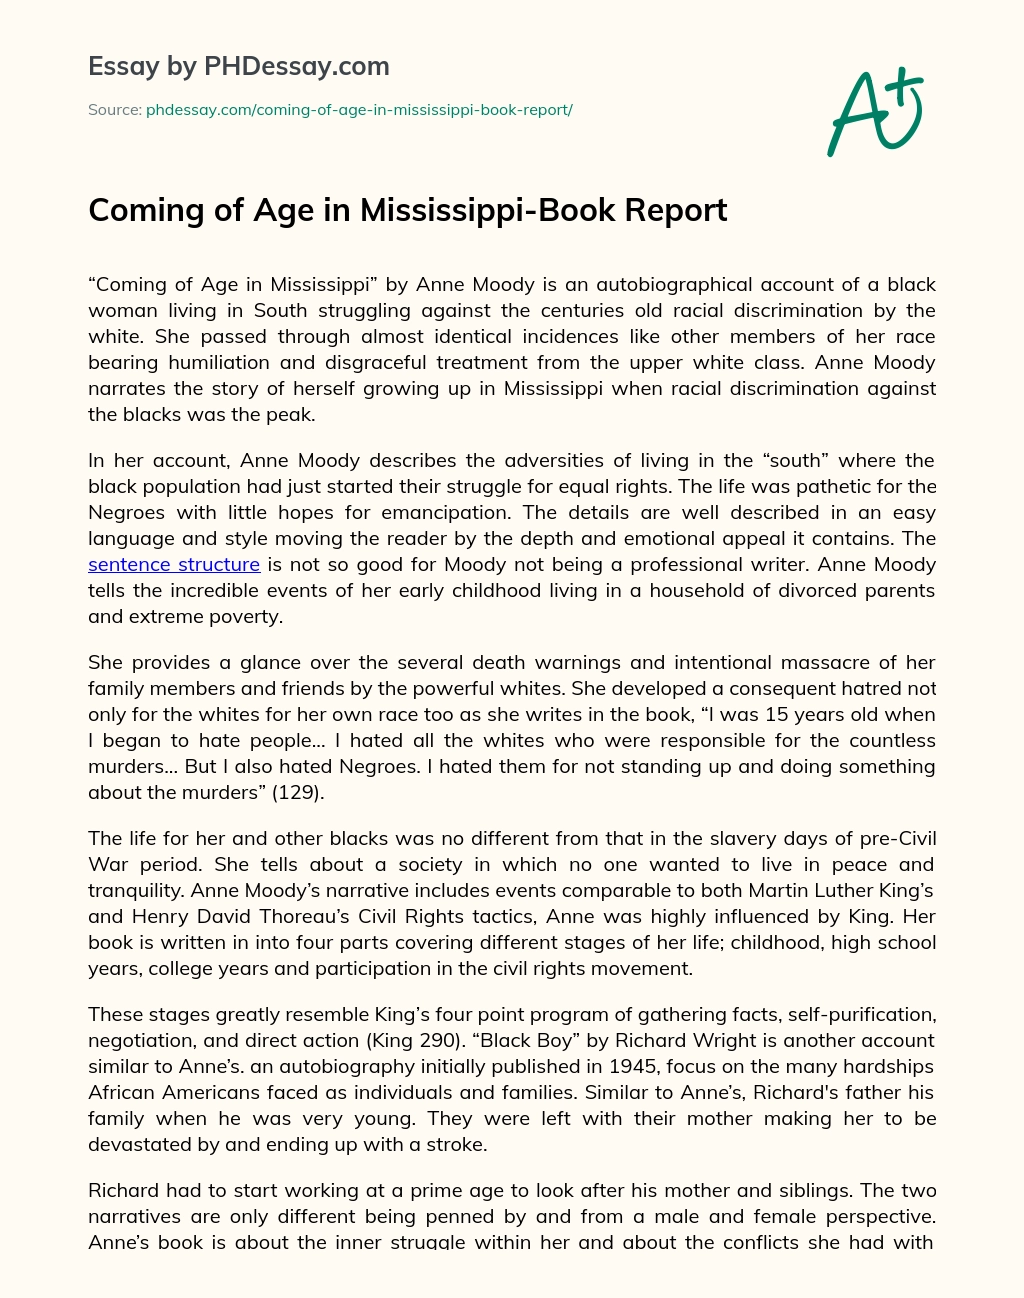 coming of age in mississippi essay